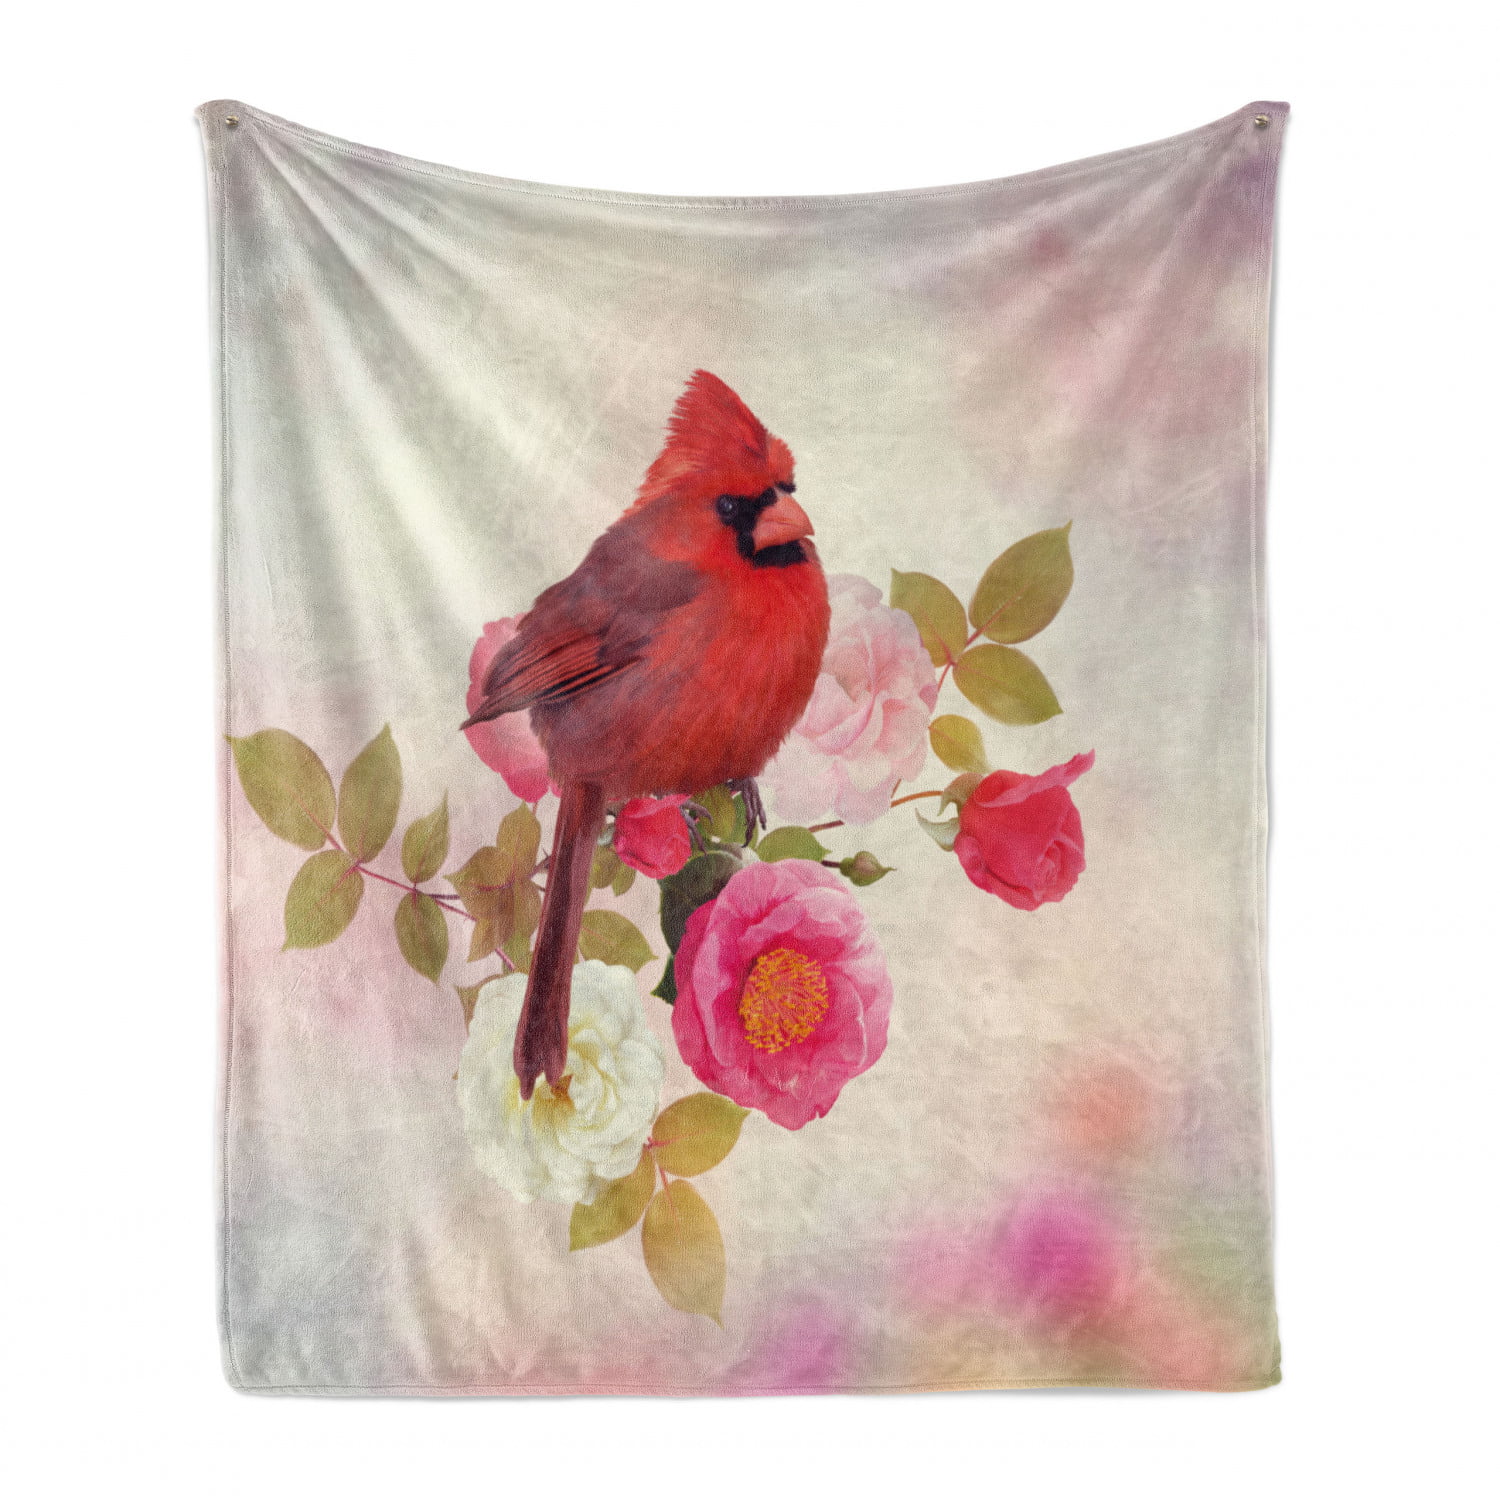 AGONA Vintage Couple Cardinals Birds Pink Floral Blanket Twin Size Soft Cozy Warm Plush Fuzzy Blanket Lighweight Decorative Bed Throw Blanket for Couch Sofa Chair Travel 60x90 Inch 